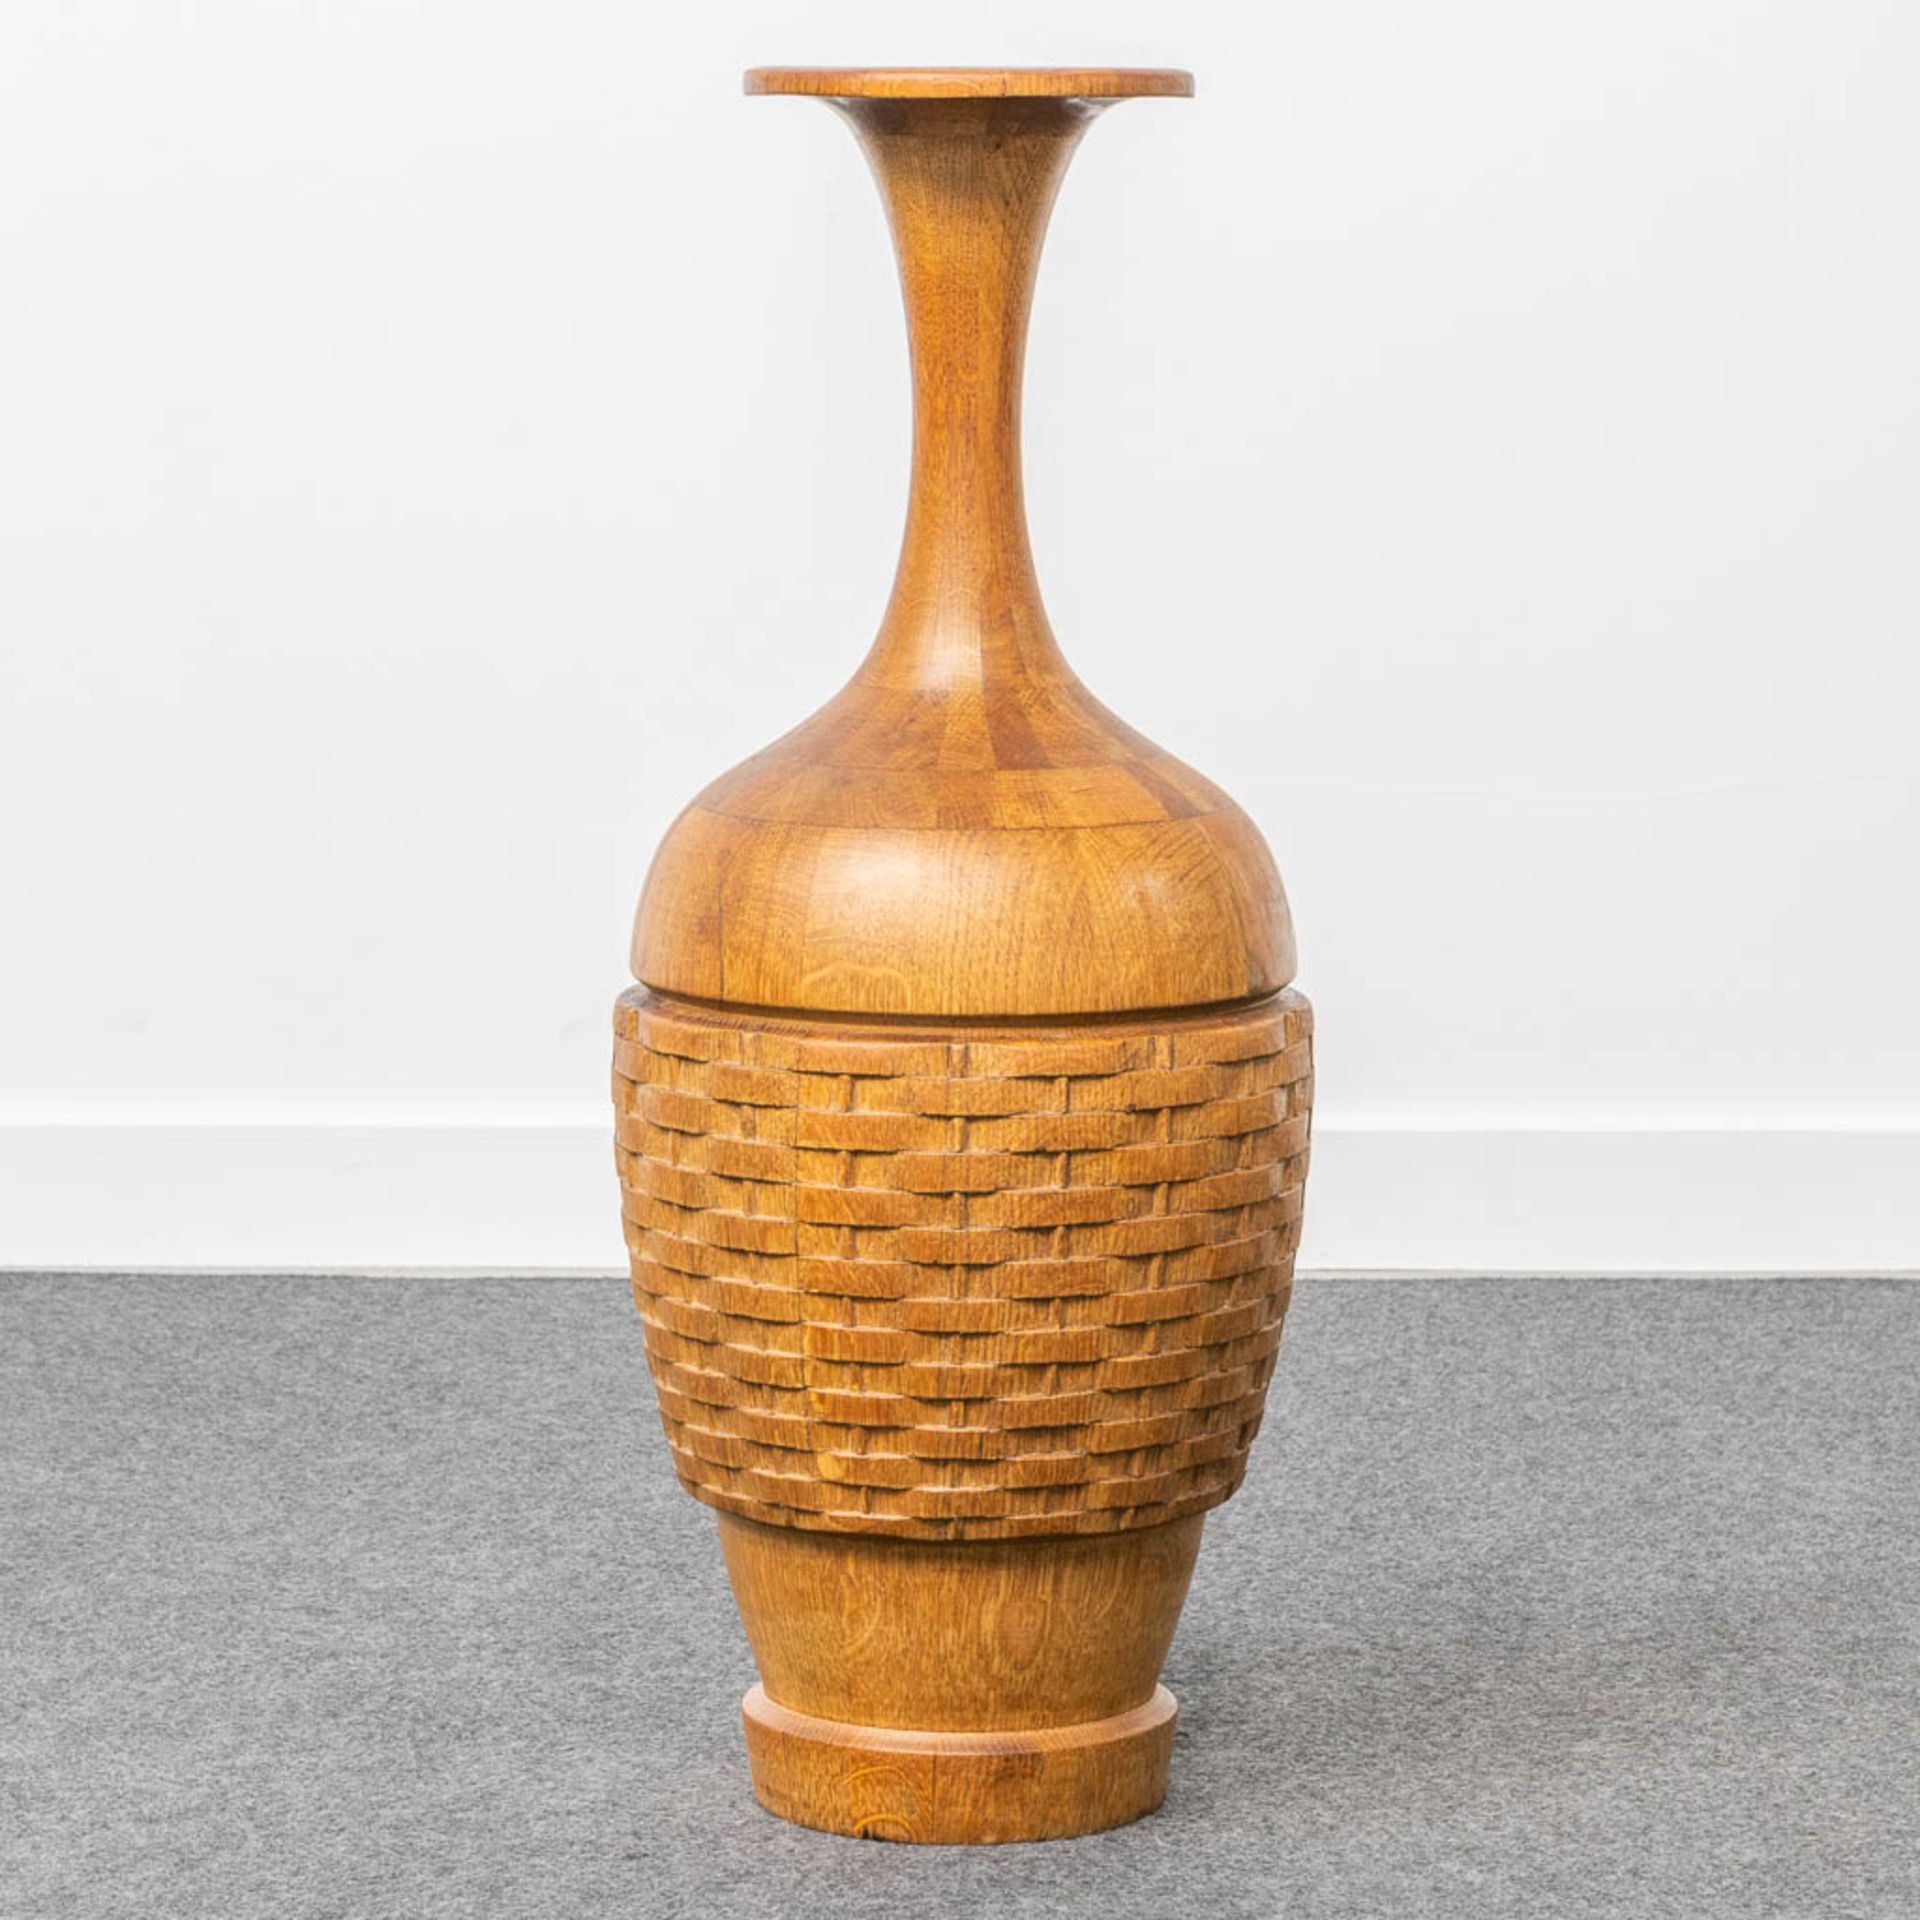 A collection of 4 wood-turned vases with inlay, made by DeCoene in Kortijk, Belgium. - Image 9 of 11